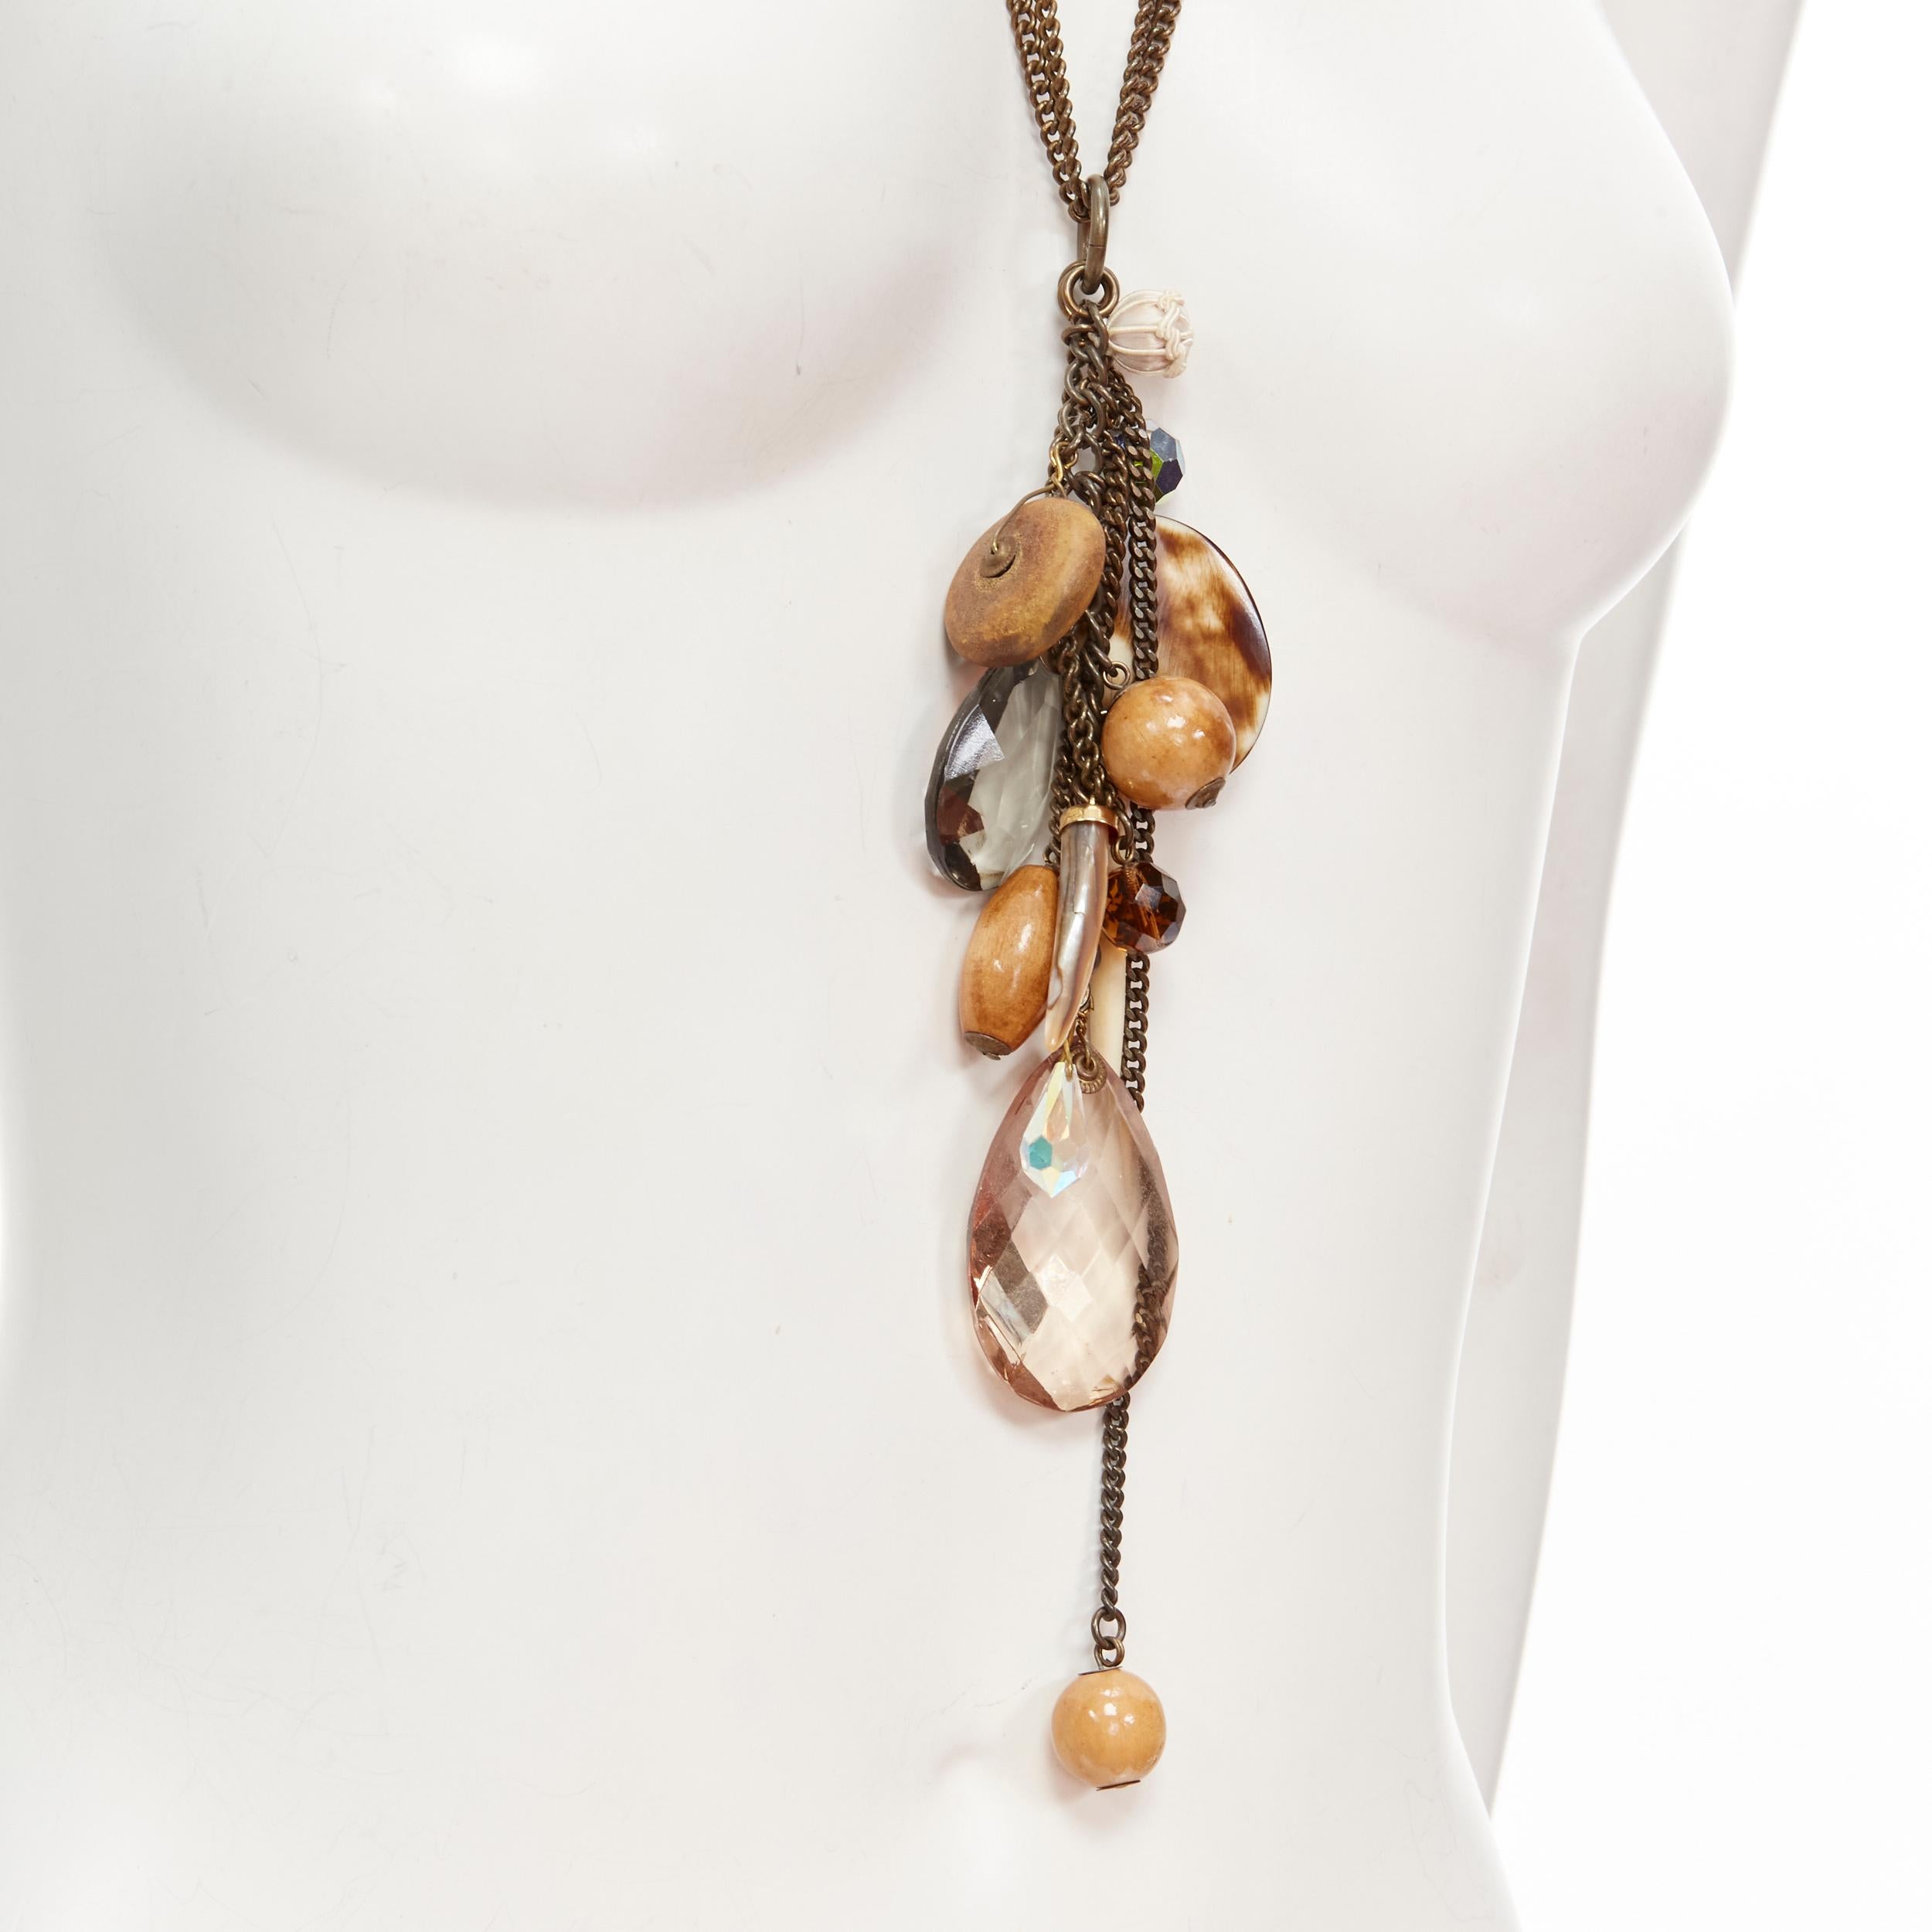 MIMCO brown acrylic wood giant crystal charm copper chain necklace
Reference: ANWU/A00298
Brand: Mimco
Material: Metal, Wood, Acrylic
Color: Brown
Closure: Lobster Clasp
Extra Details: Brand logo metal tag.

CONDITION:
Condition: Very good, this